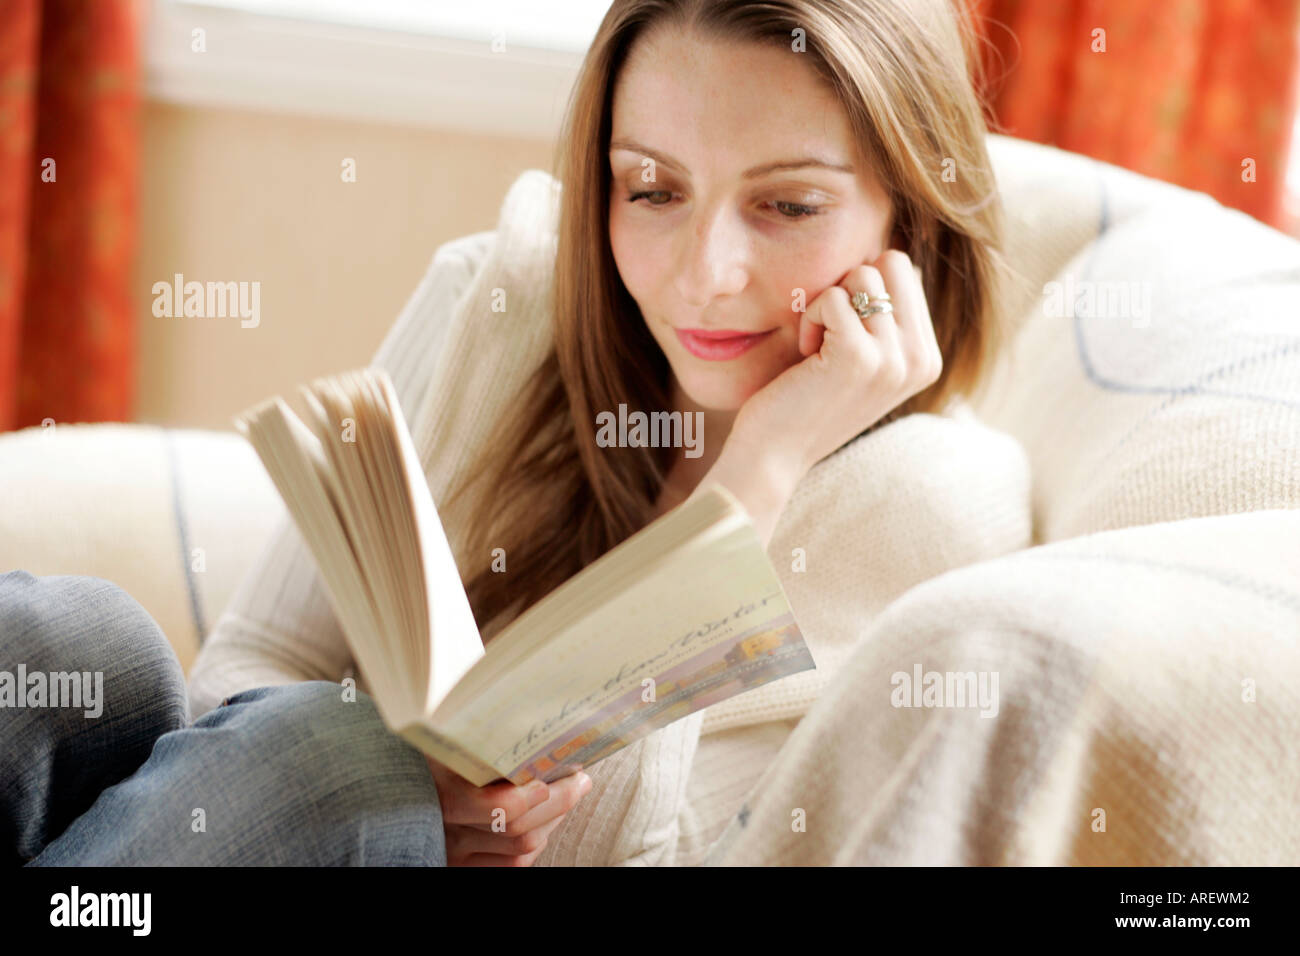 Woman reading a book Stock Photo